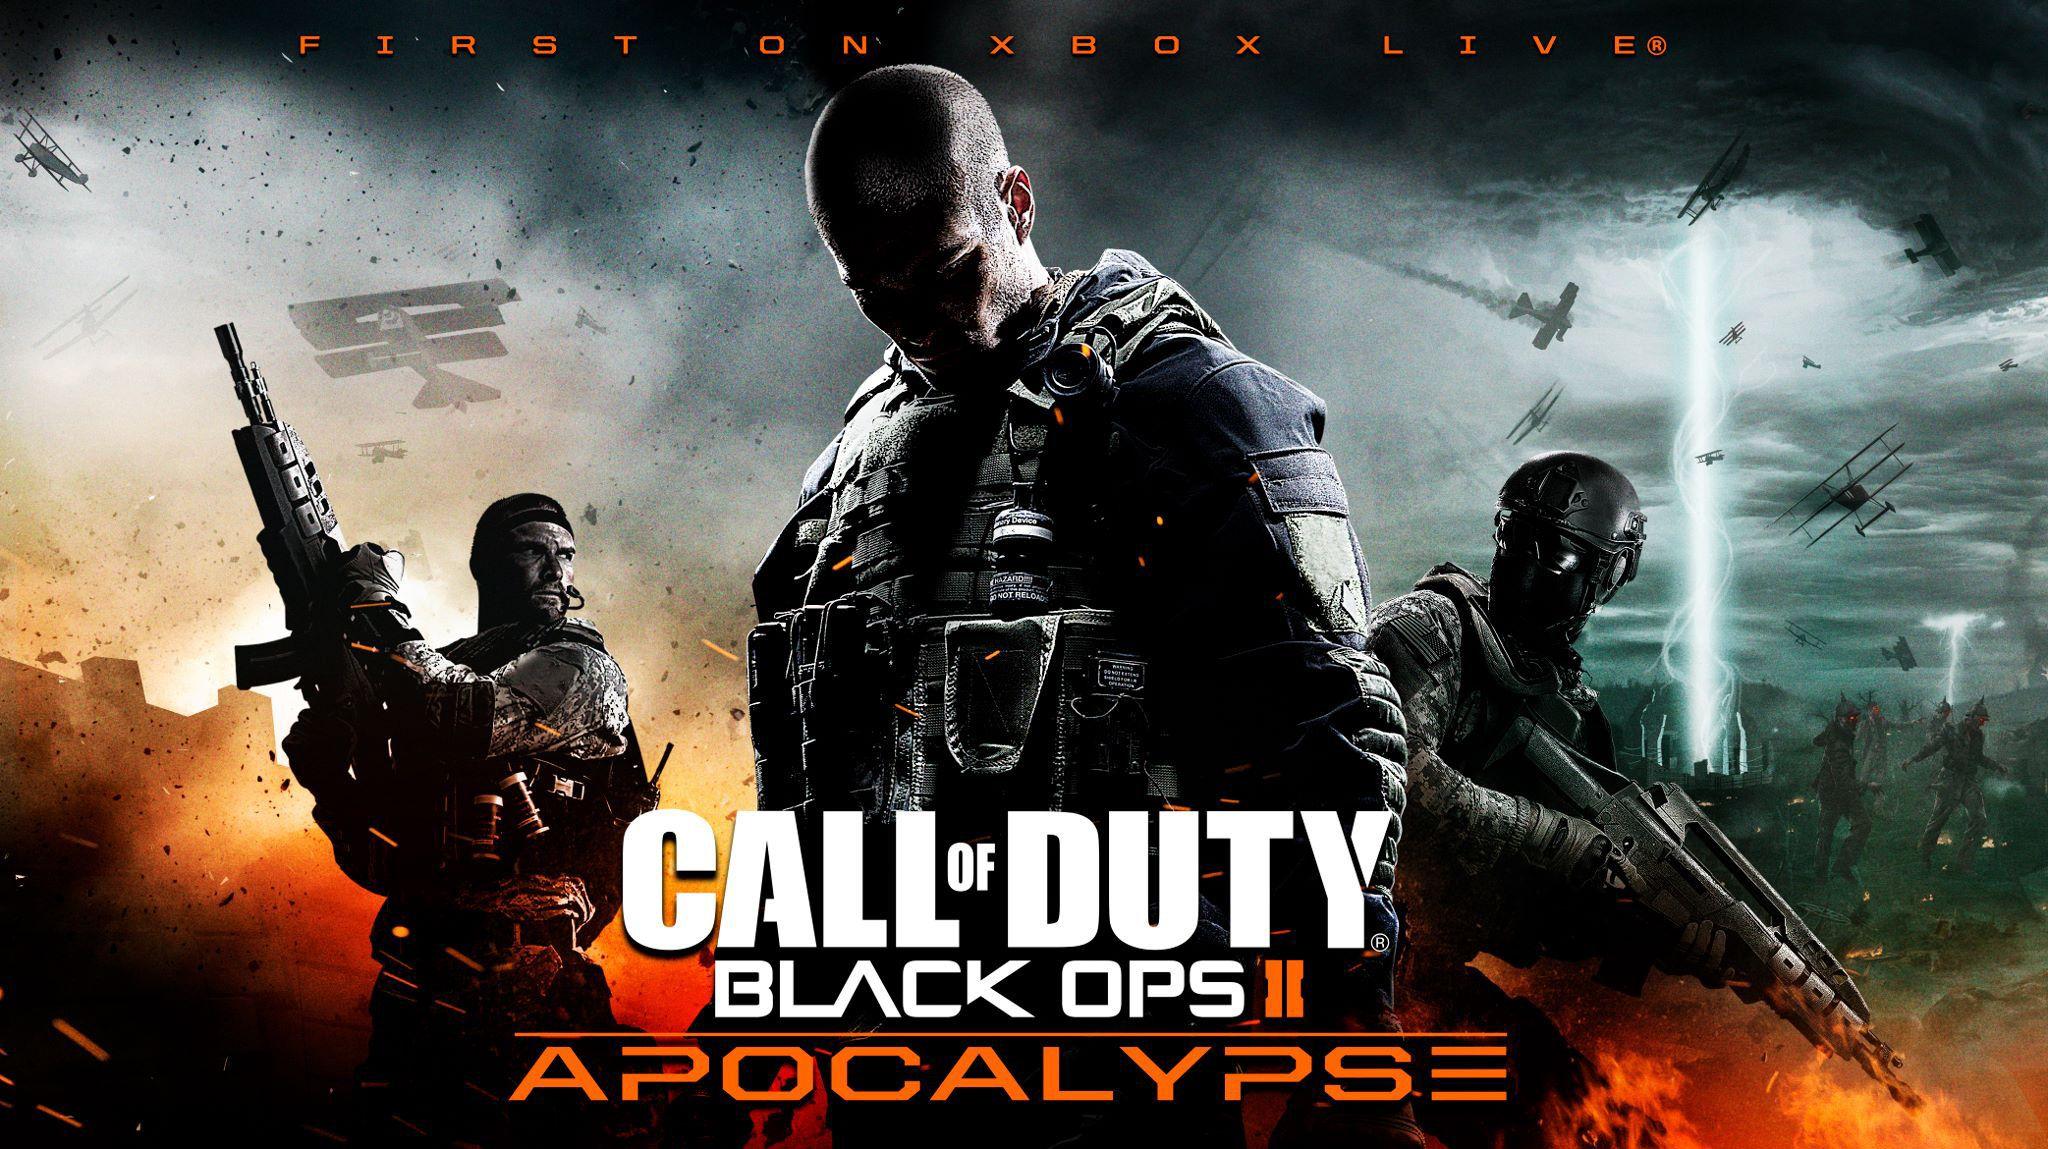 Call of Duty: Black Ops 2 DLC wraps up with 'Apocalypse', brings